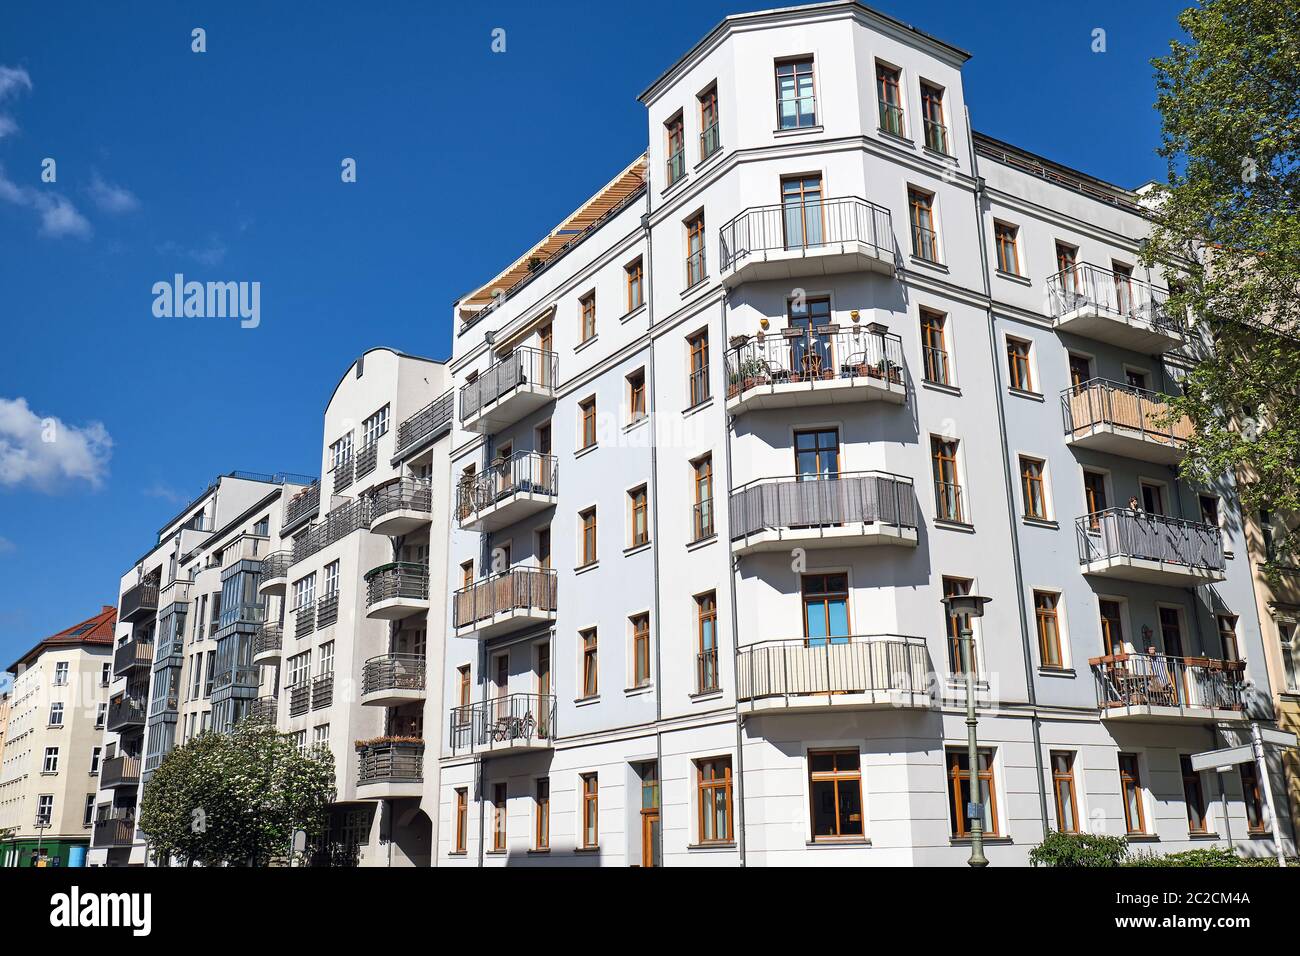 Modern multi-family apartment houses seen in Berlin, Germany Stock Photo